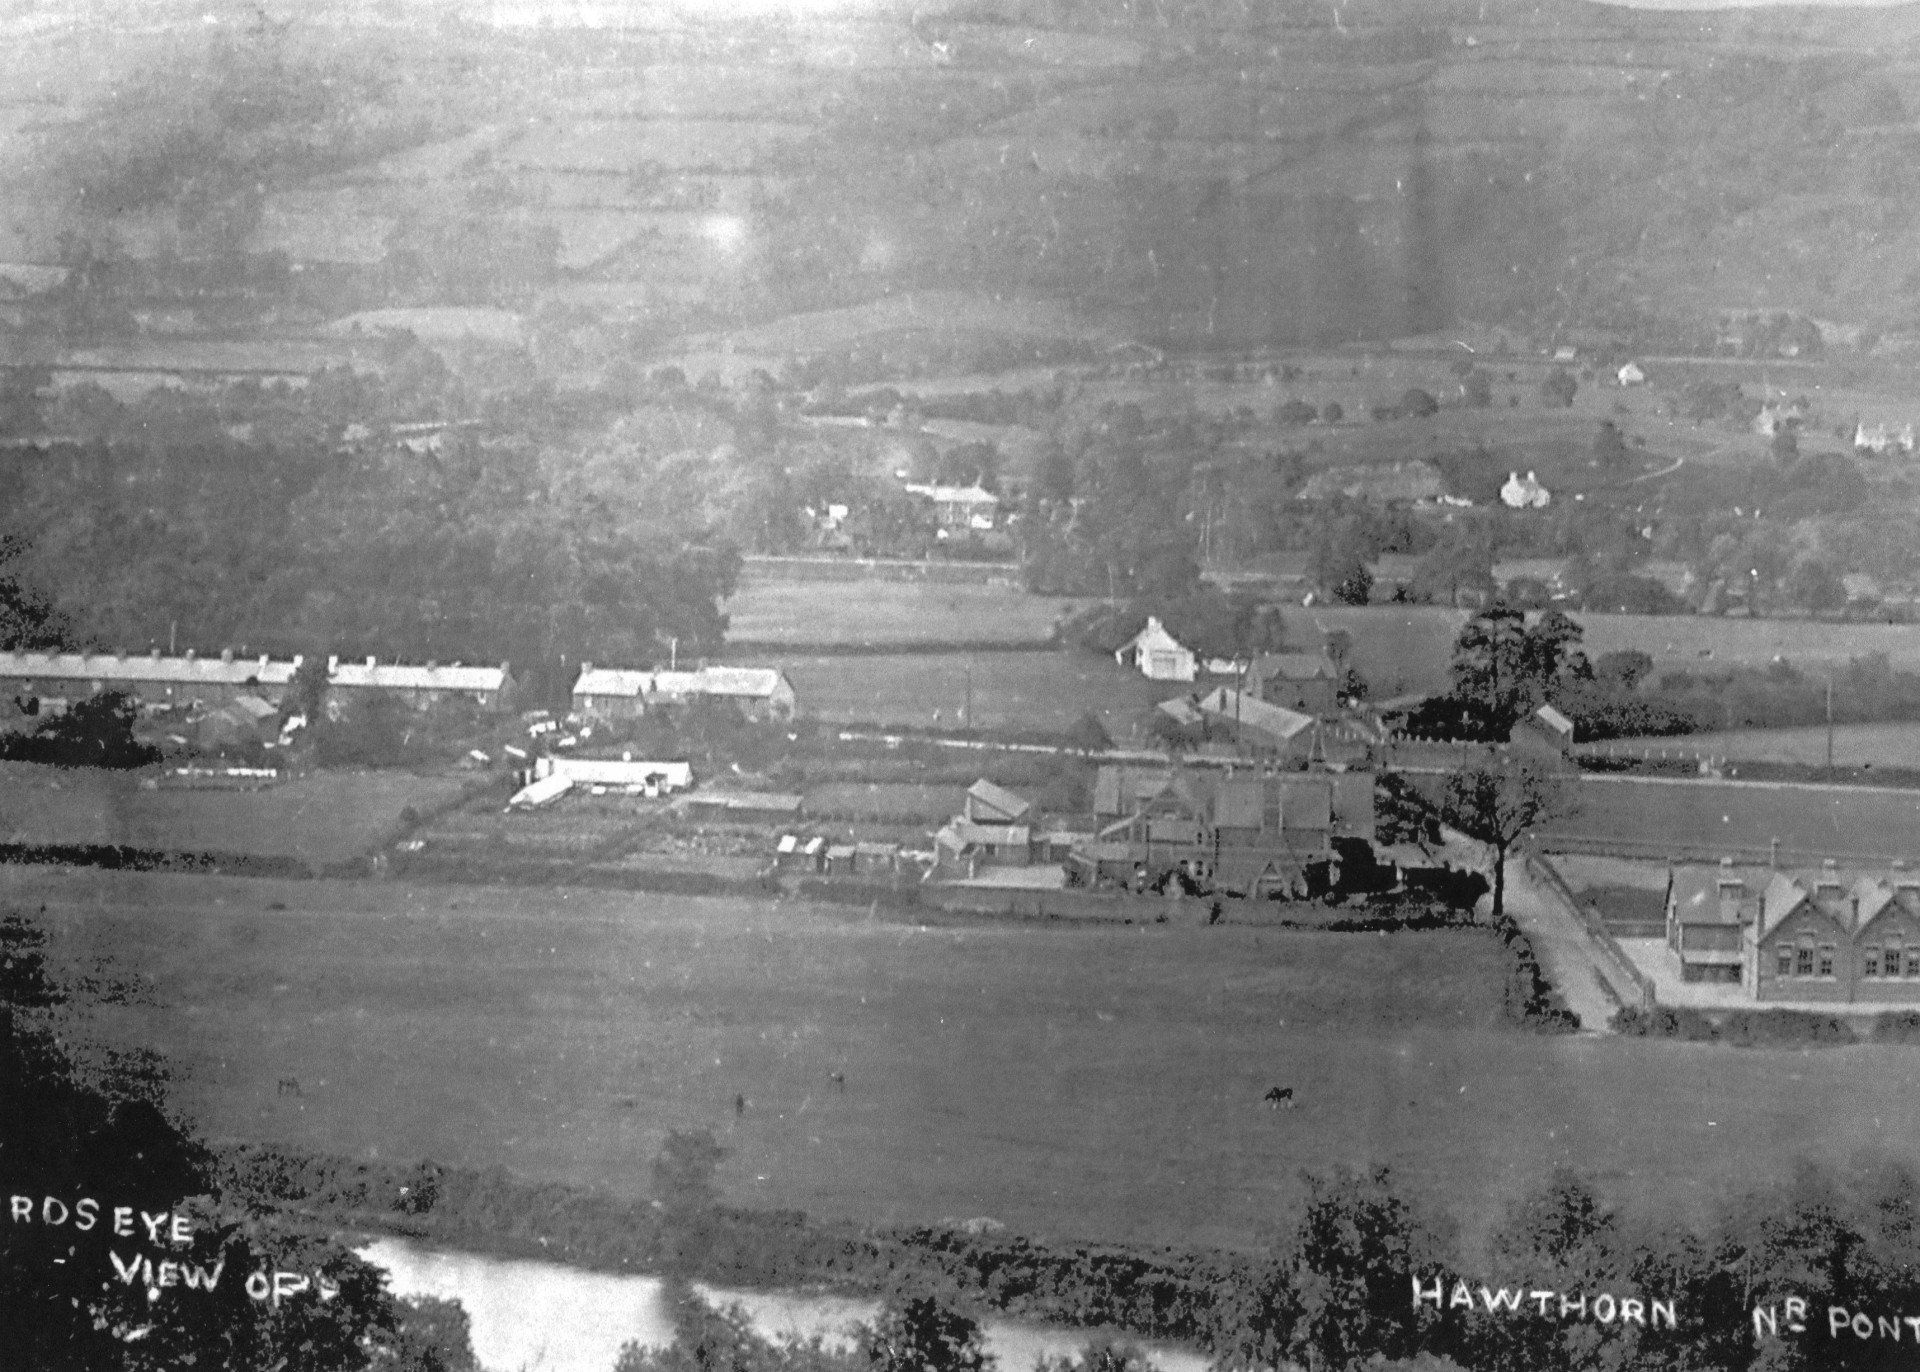 View of rural Hawthorn at the turn of the 20th century